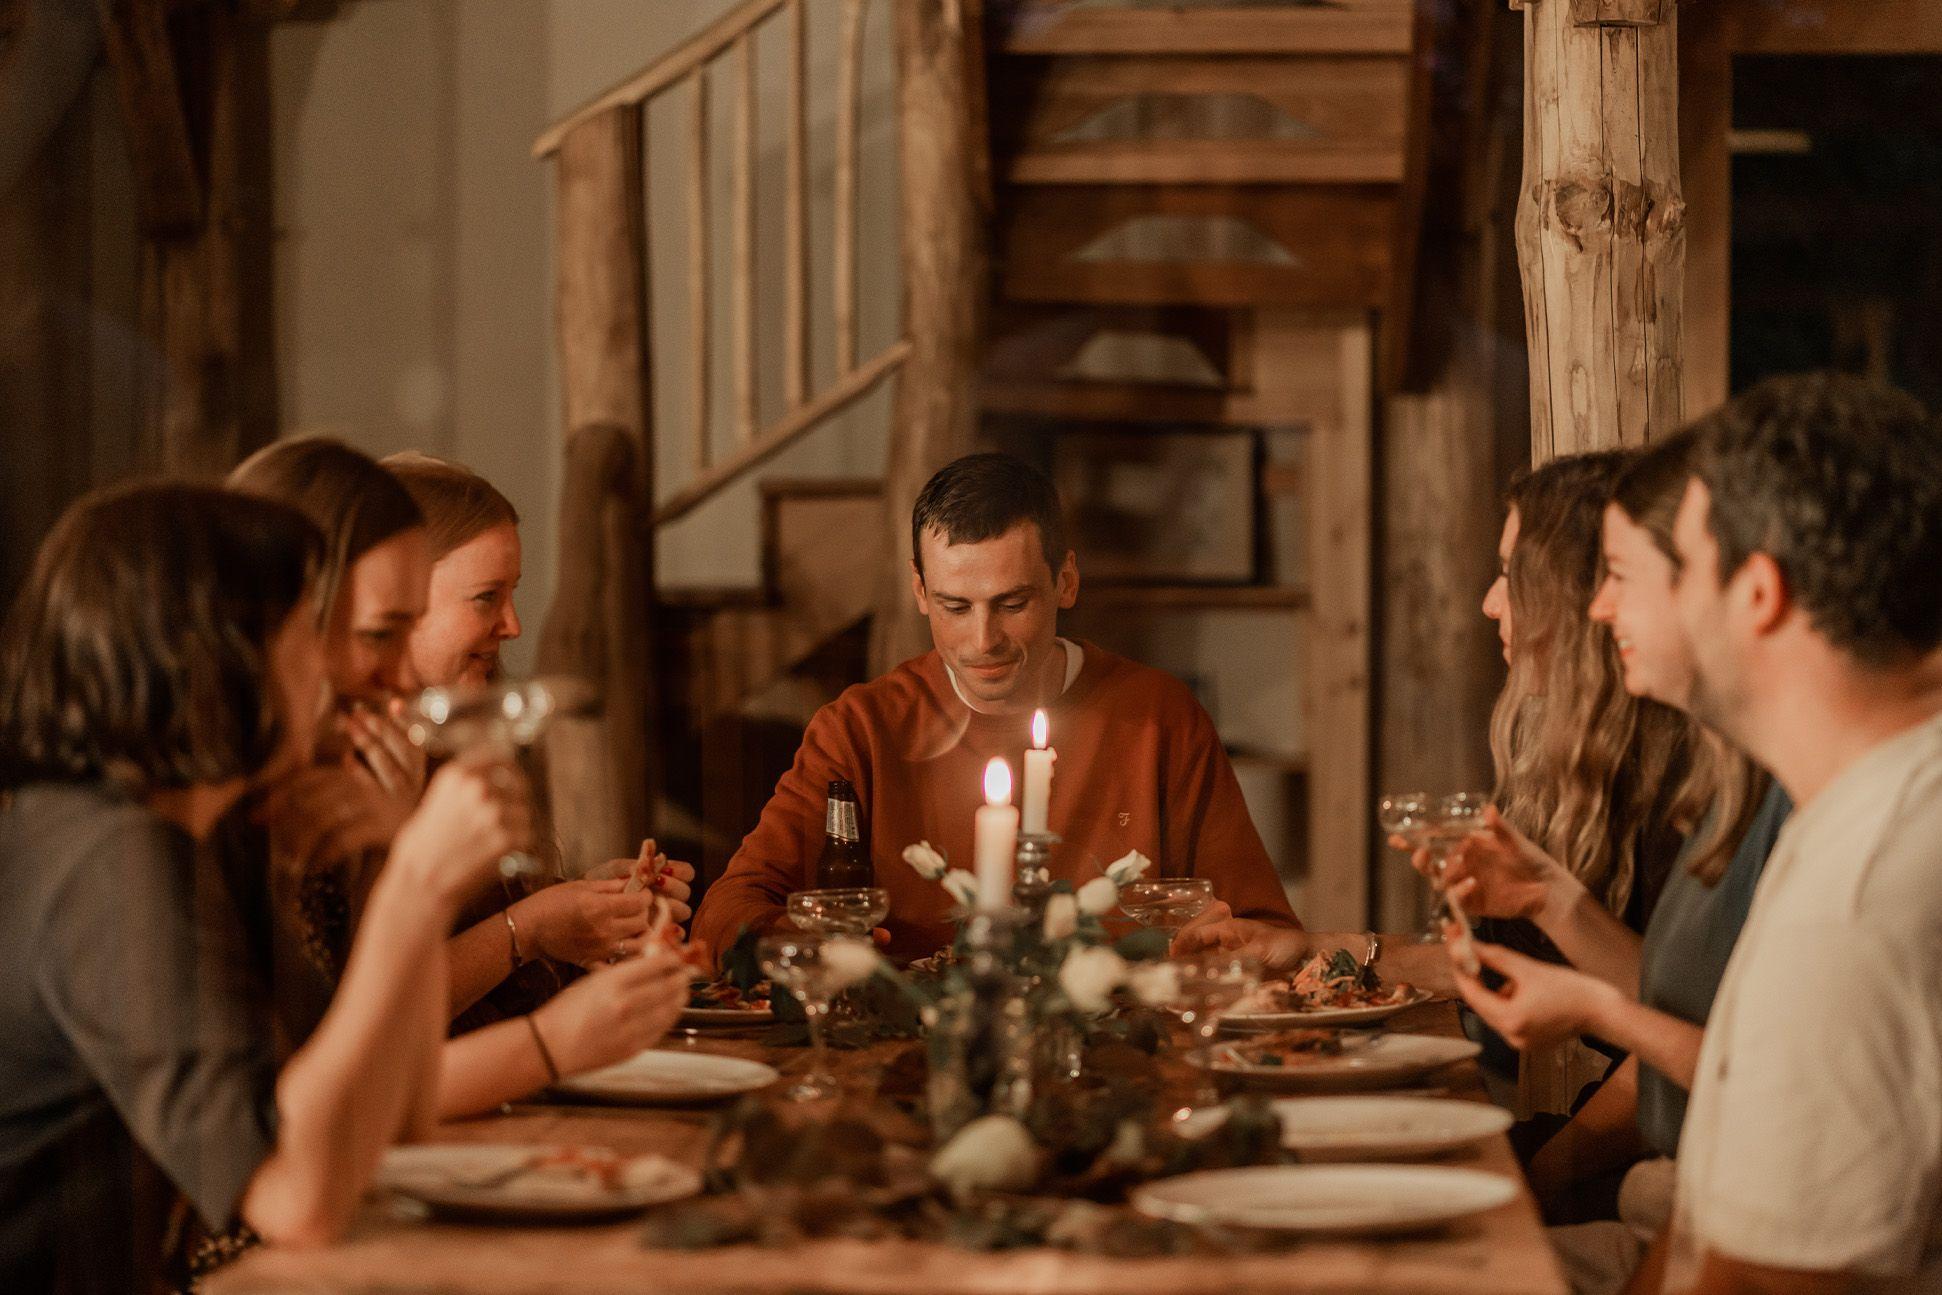 Group eating in a cabin with table and candles 